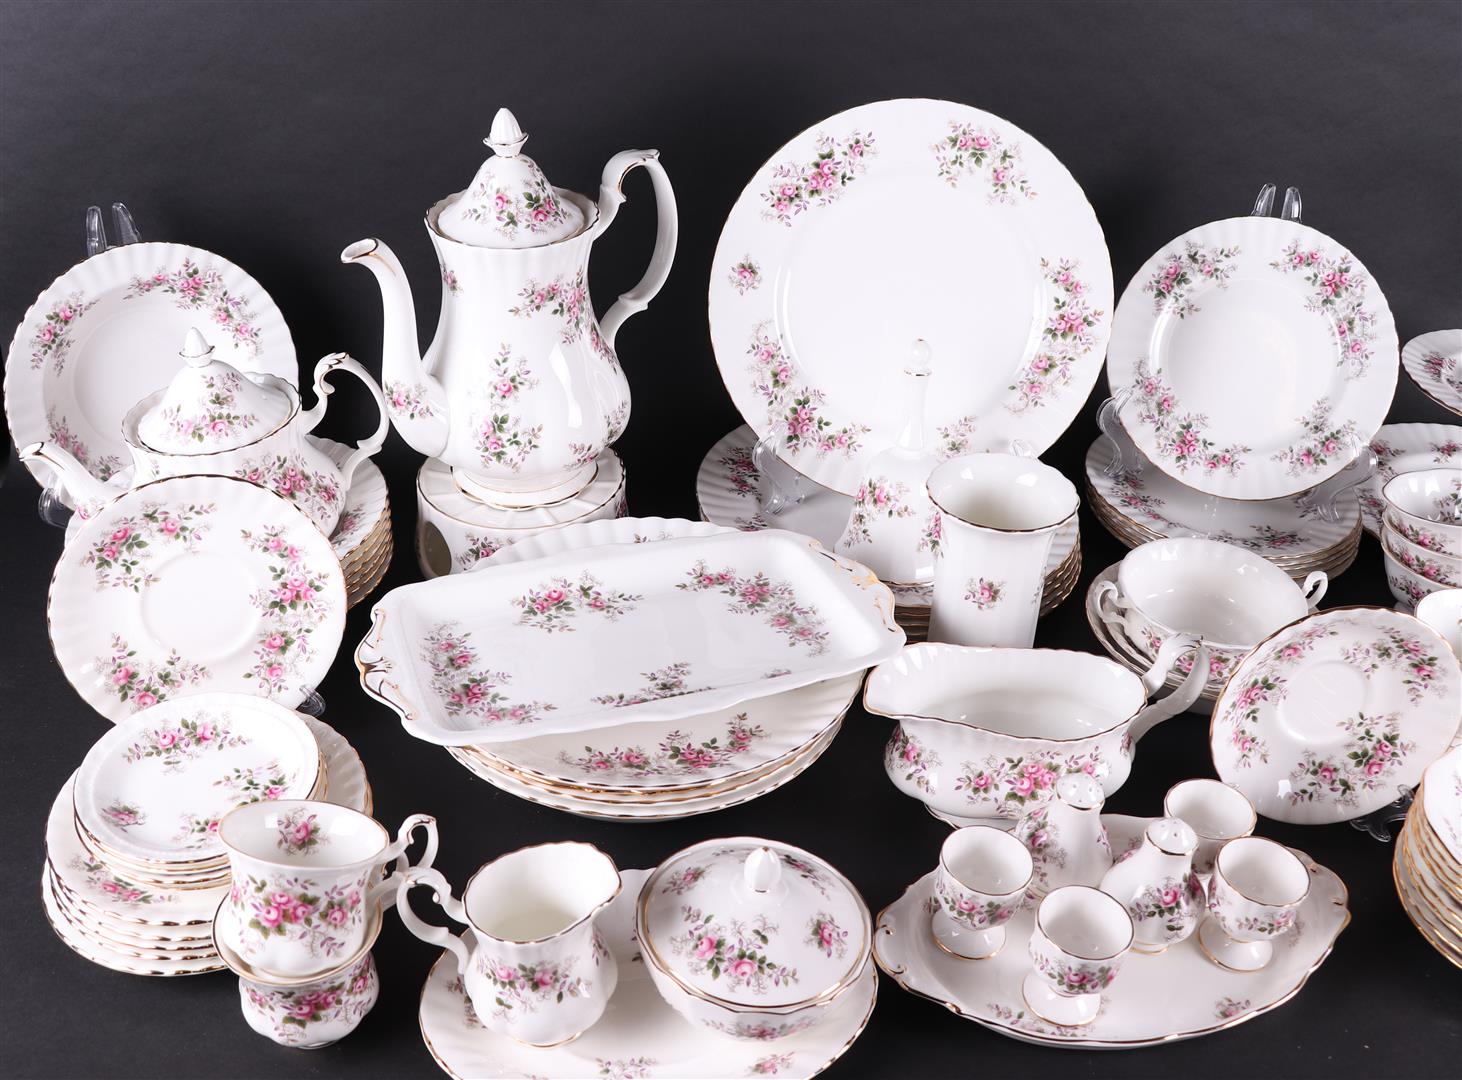 A very large and extensive Royal Albert, "Lavender Rose" service. - Image 4 of 6